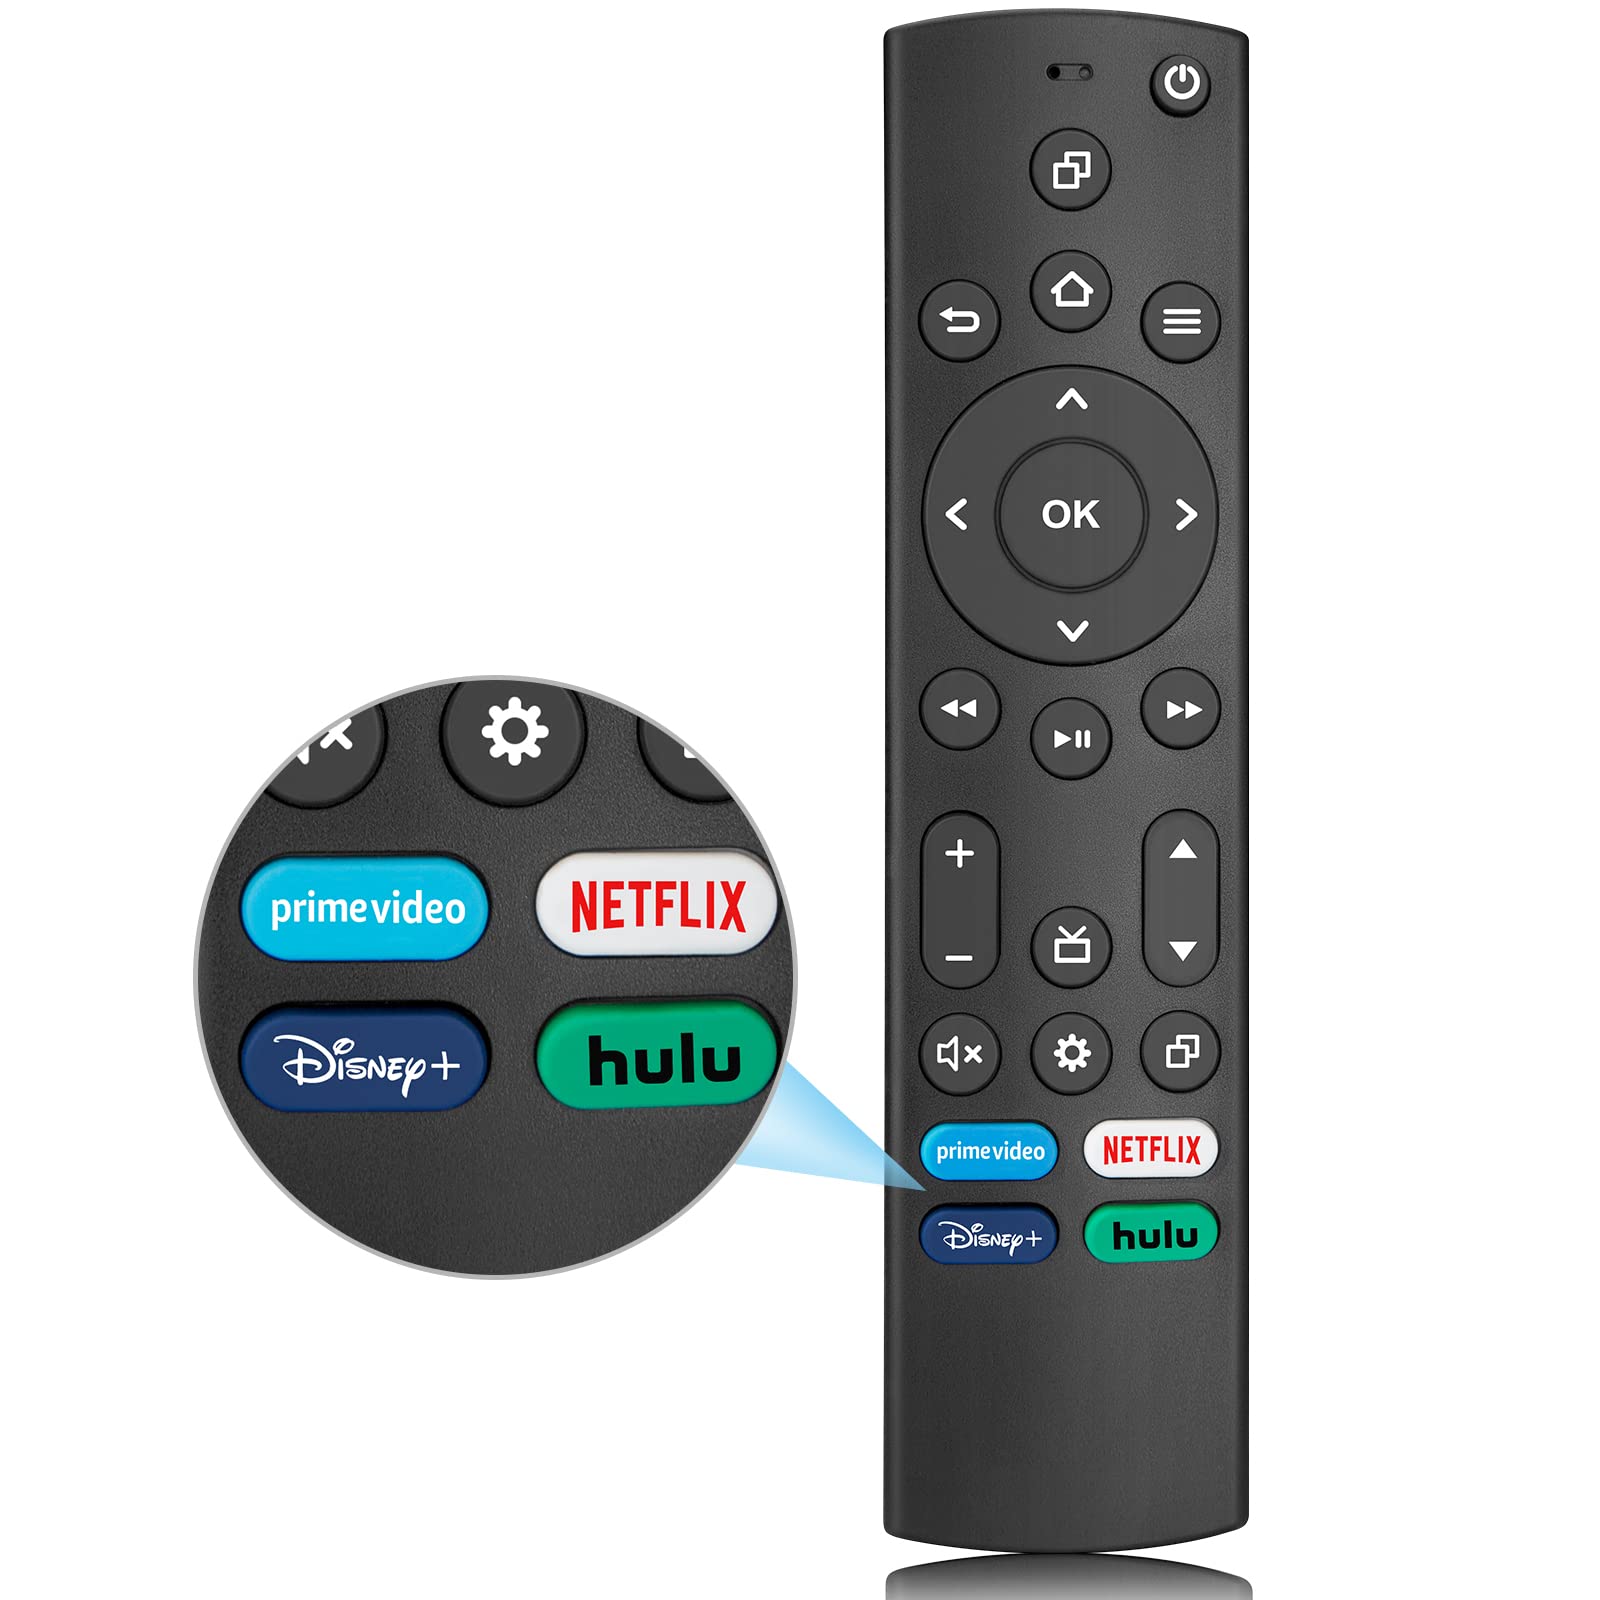 Replacement Remote for Insignia/Toshiba Smart TVs Compatible with All Insignia Fire Smart TVs and Toshiba Fire Smart TVs